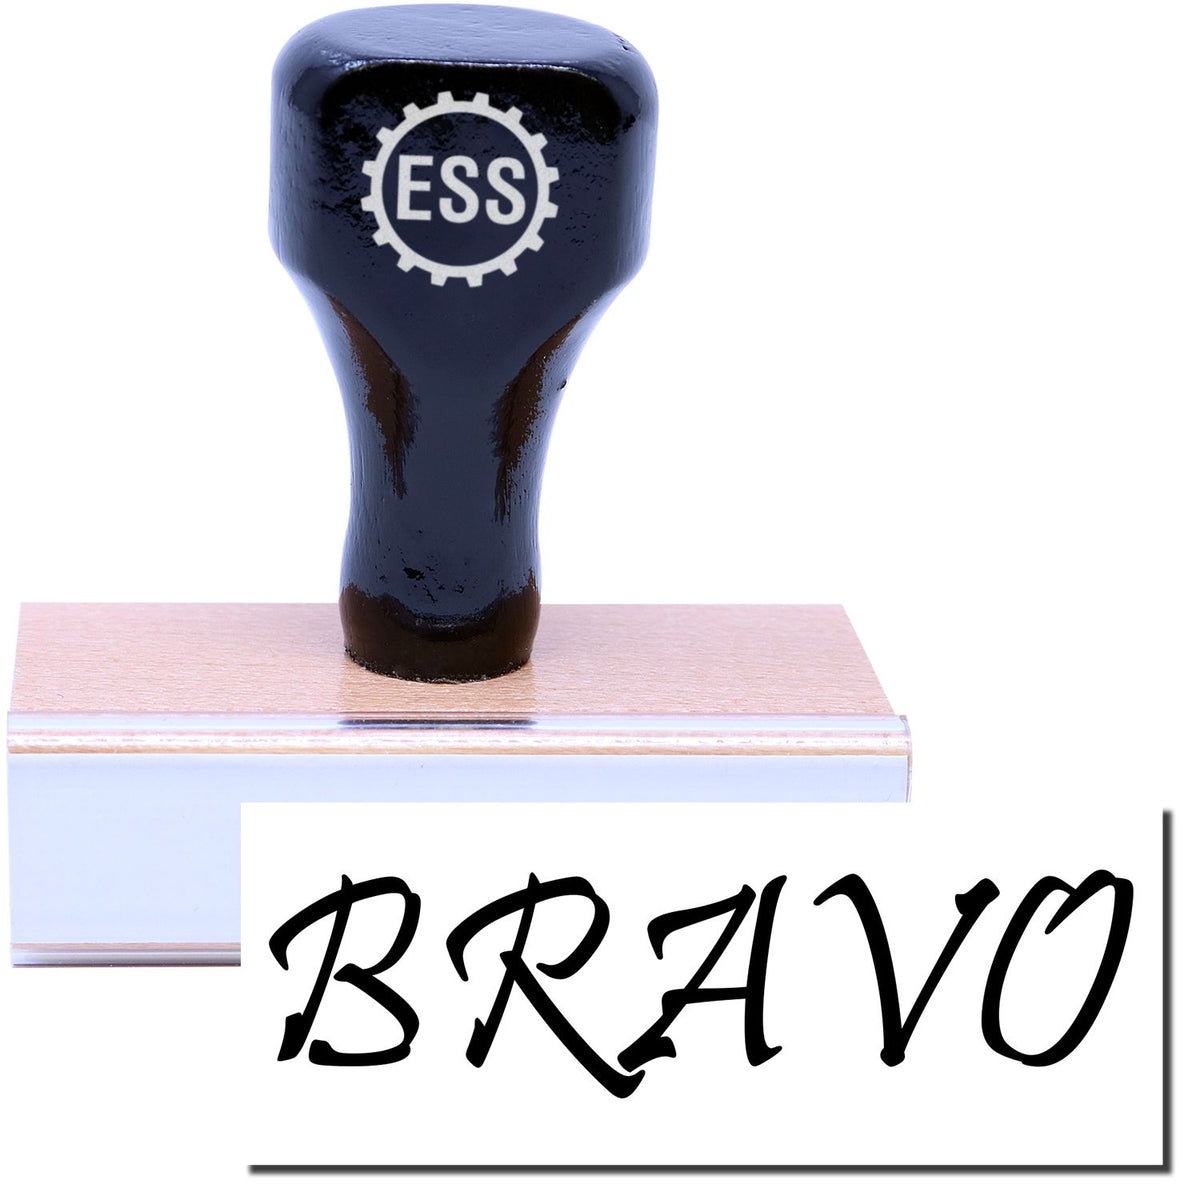 A stock office rubber stamp with a stamped image showing how the text &quot;BRAVO&quot; in a large font is displayed after stamping.